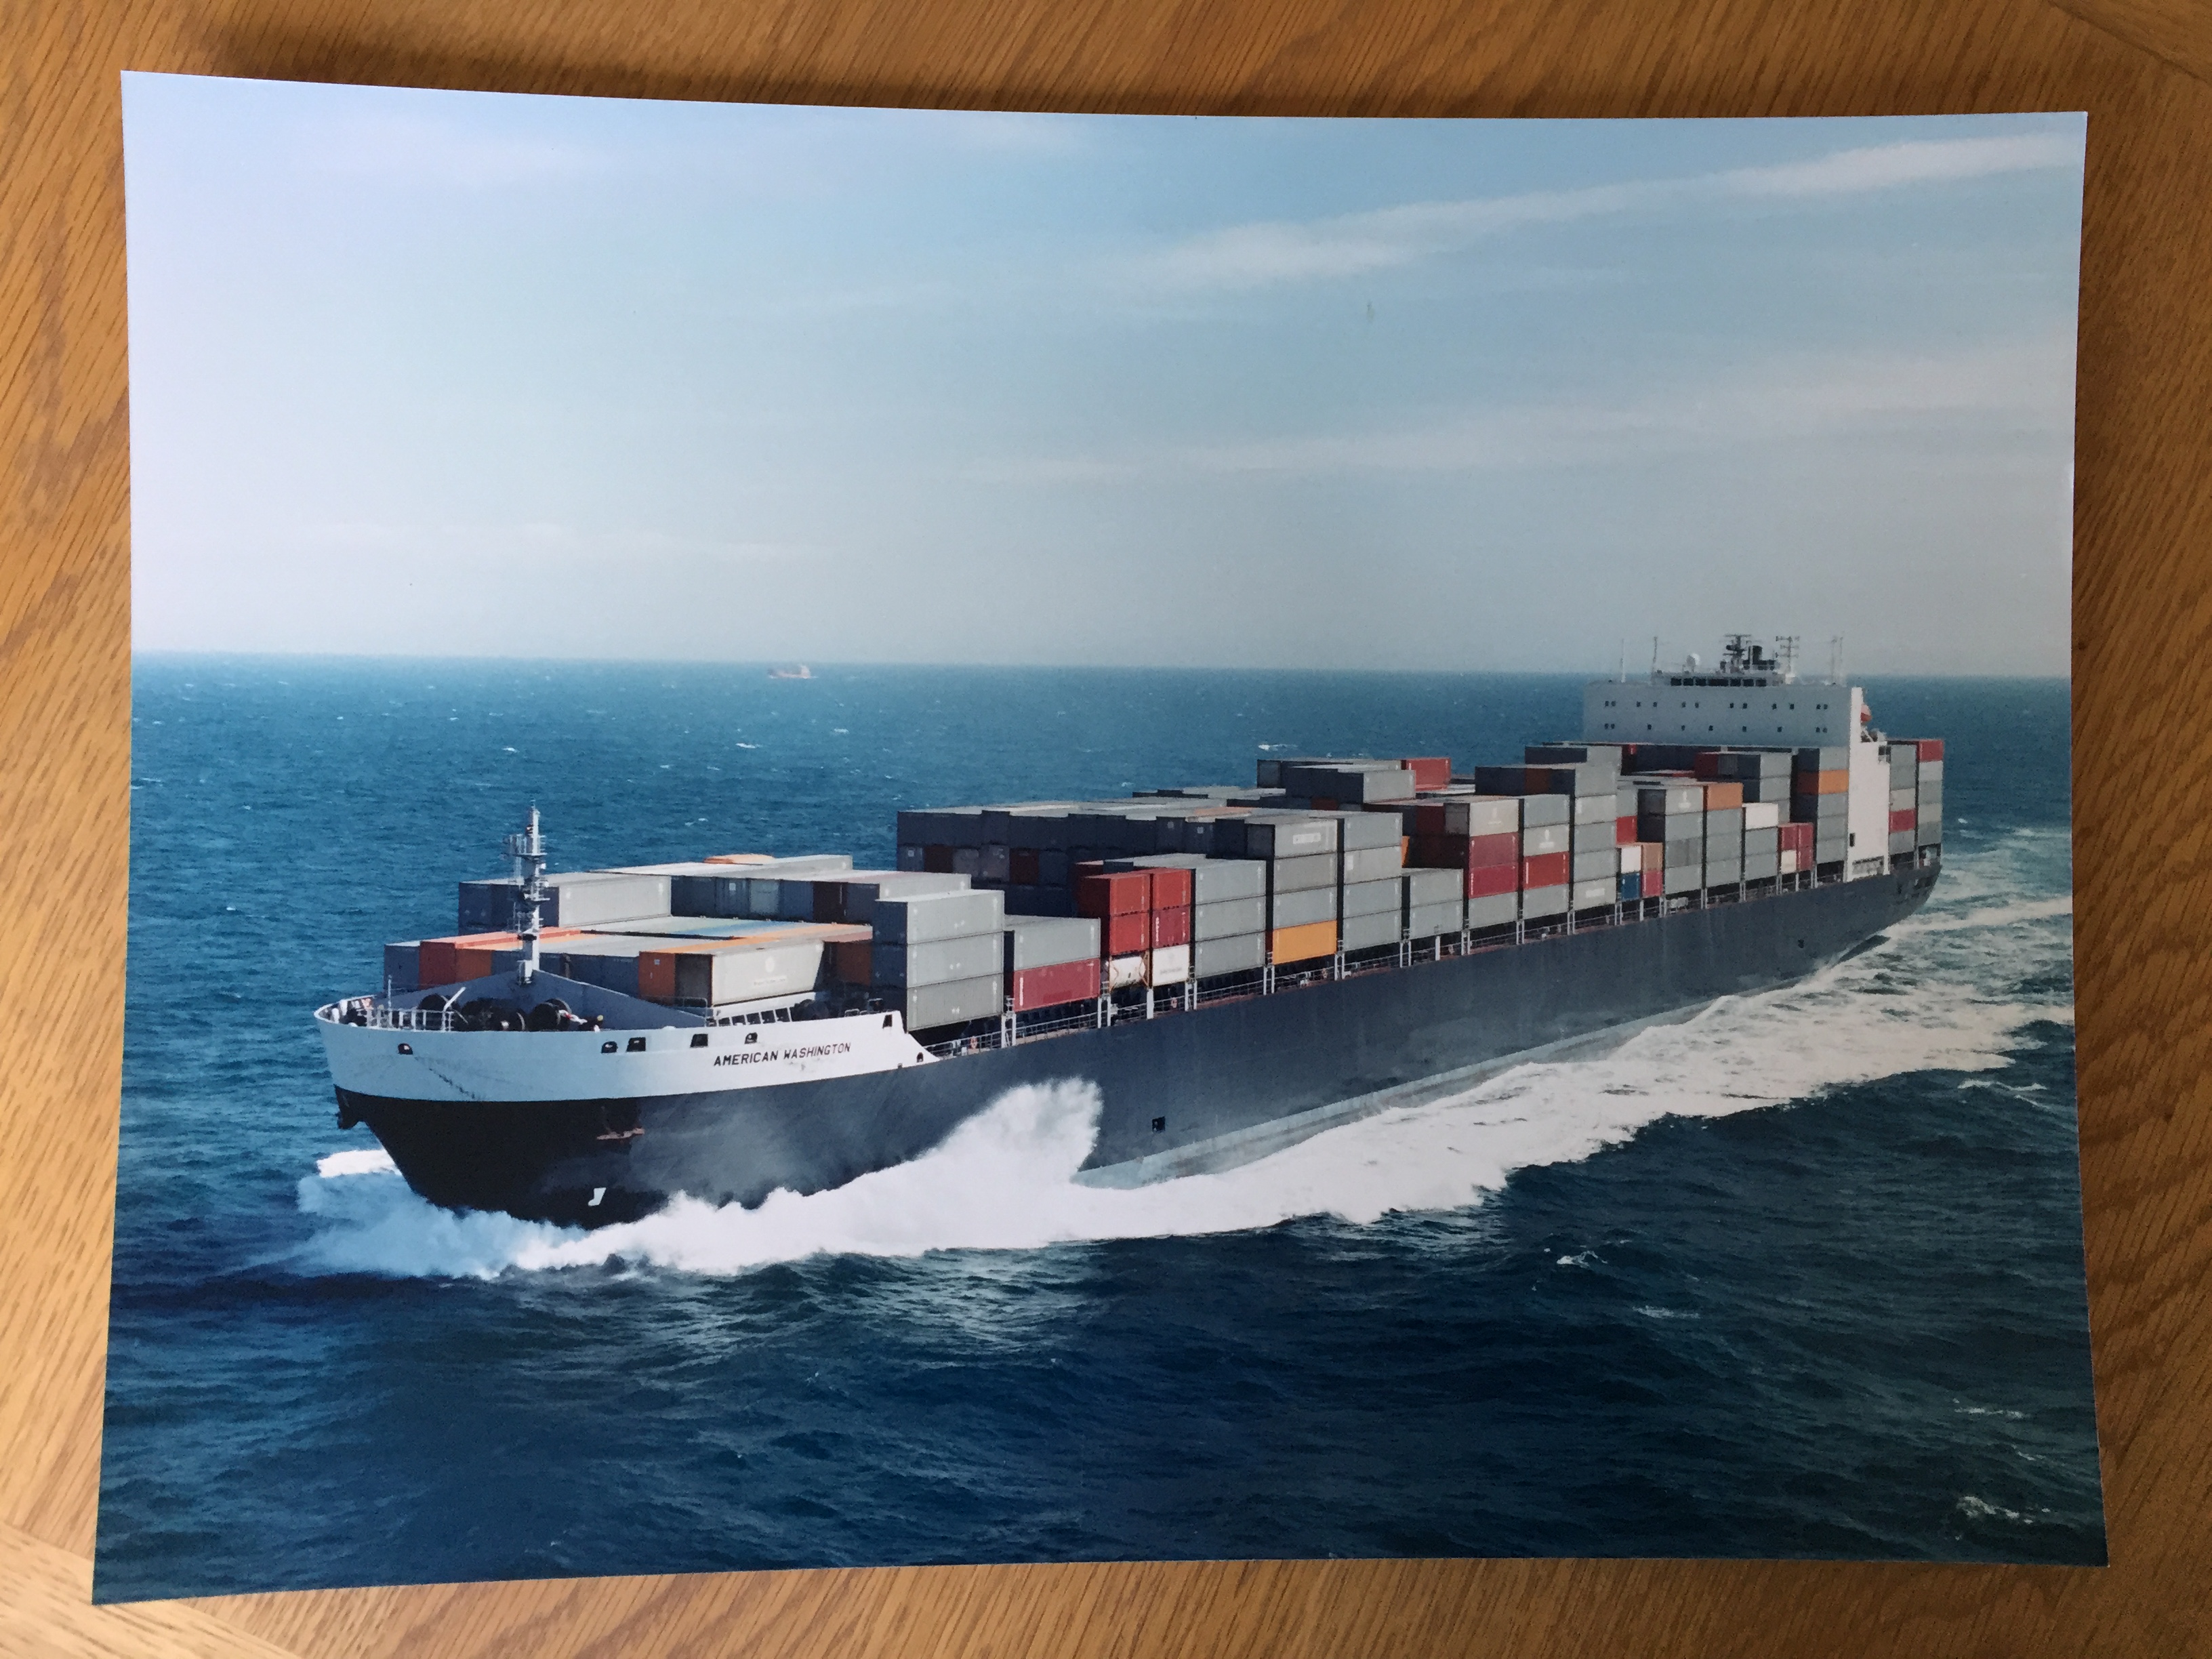 LARGE SIZE COLOUR PHOTOGRAPH OF THE CONTAINER VESSEL AMERICAN WASHINGTON